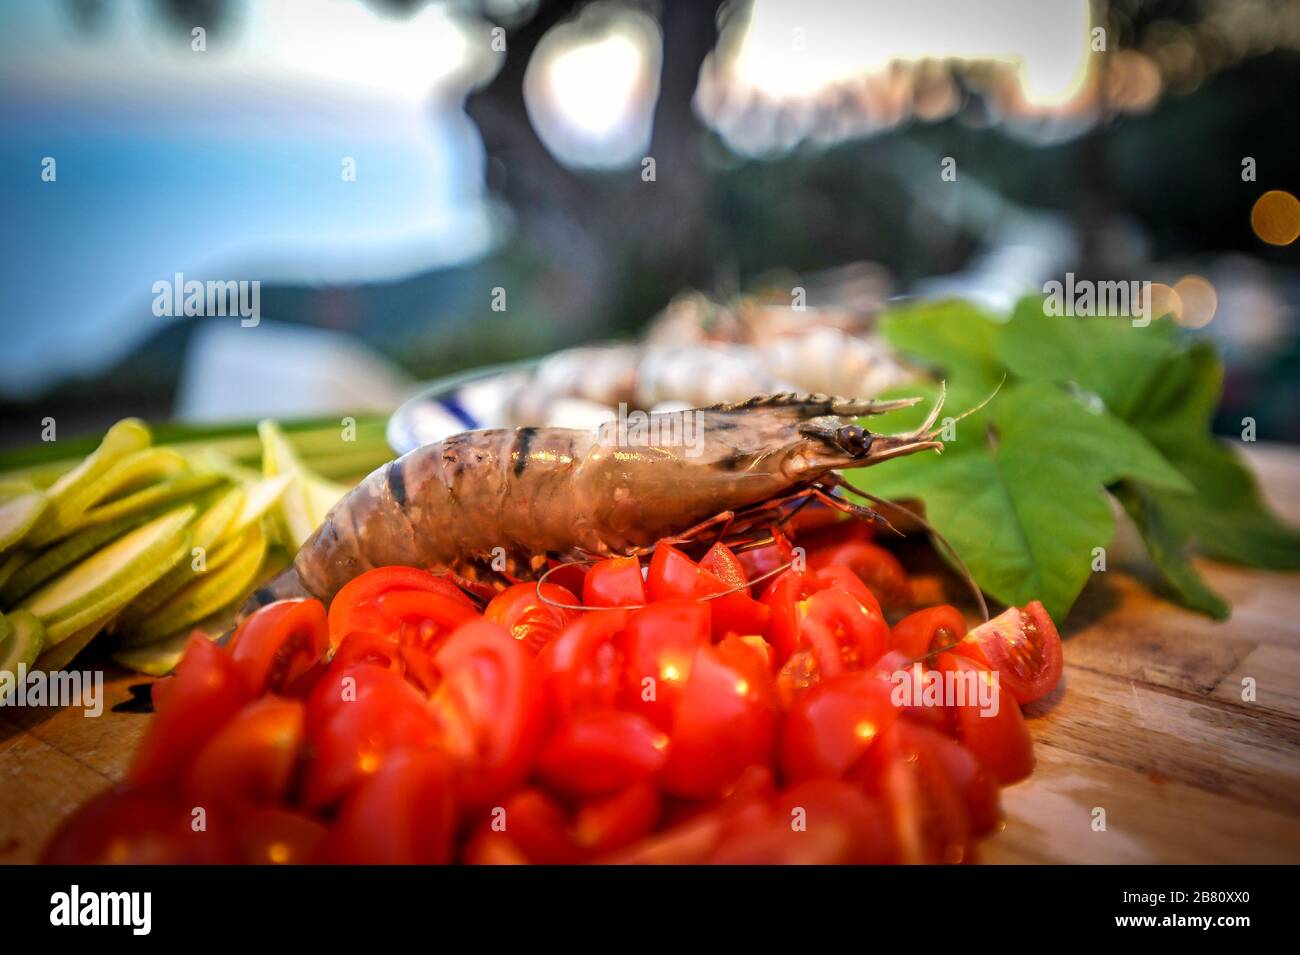 Chopped cherry tomatoes with zucchini and shrimp. Stock Photo